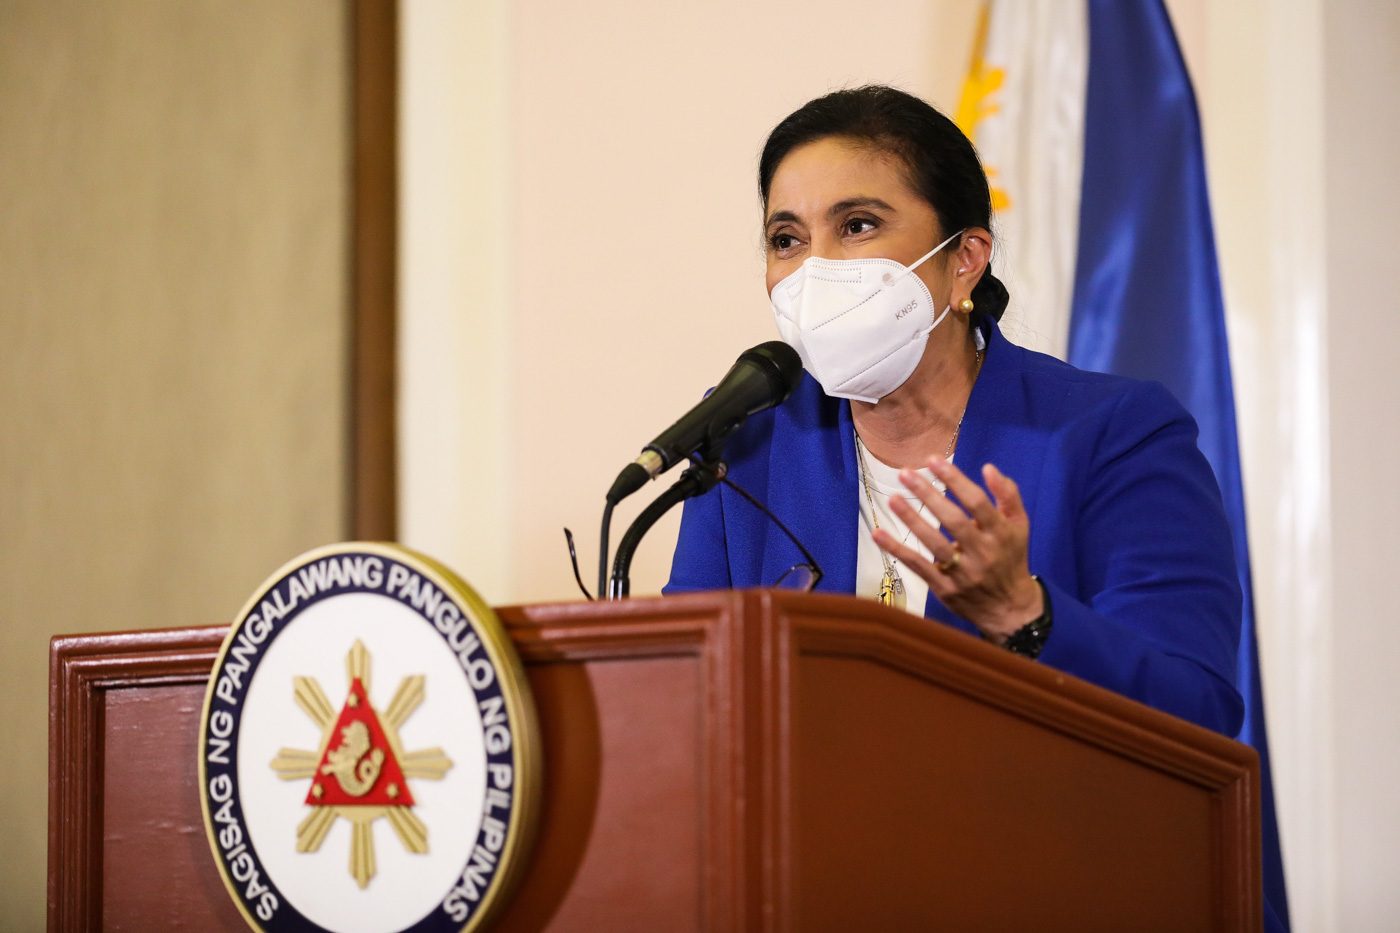 Robredo tempted to tell Duterte: Just let me handle pandemic response